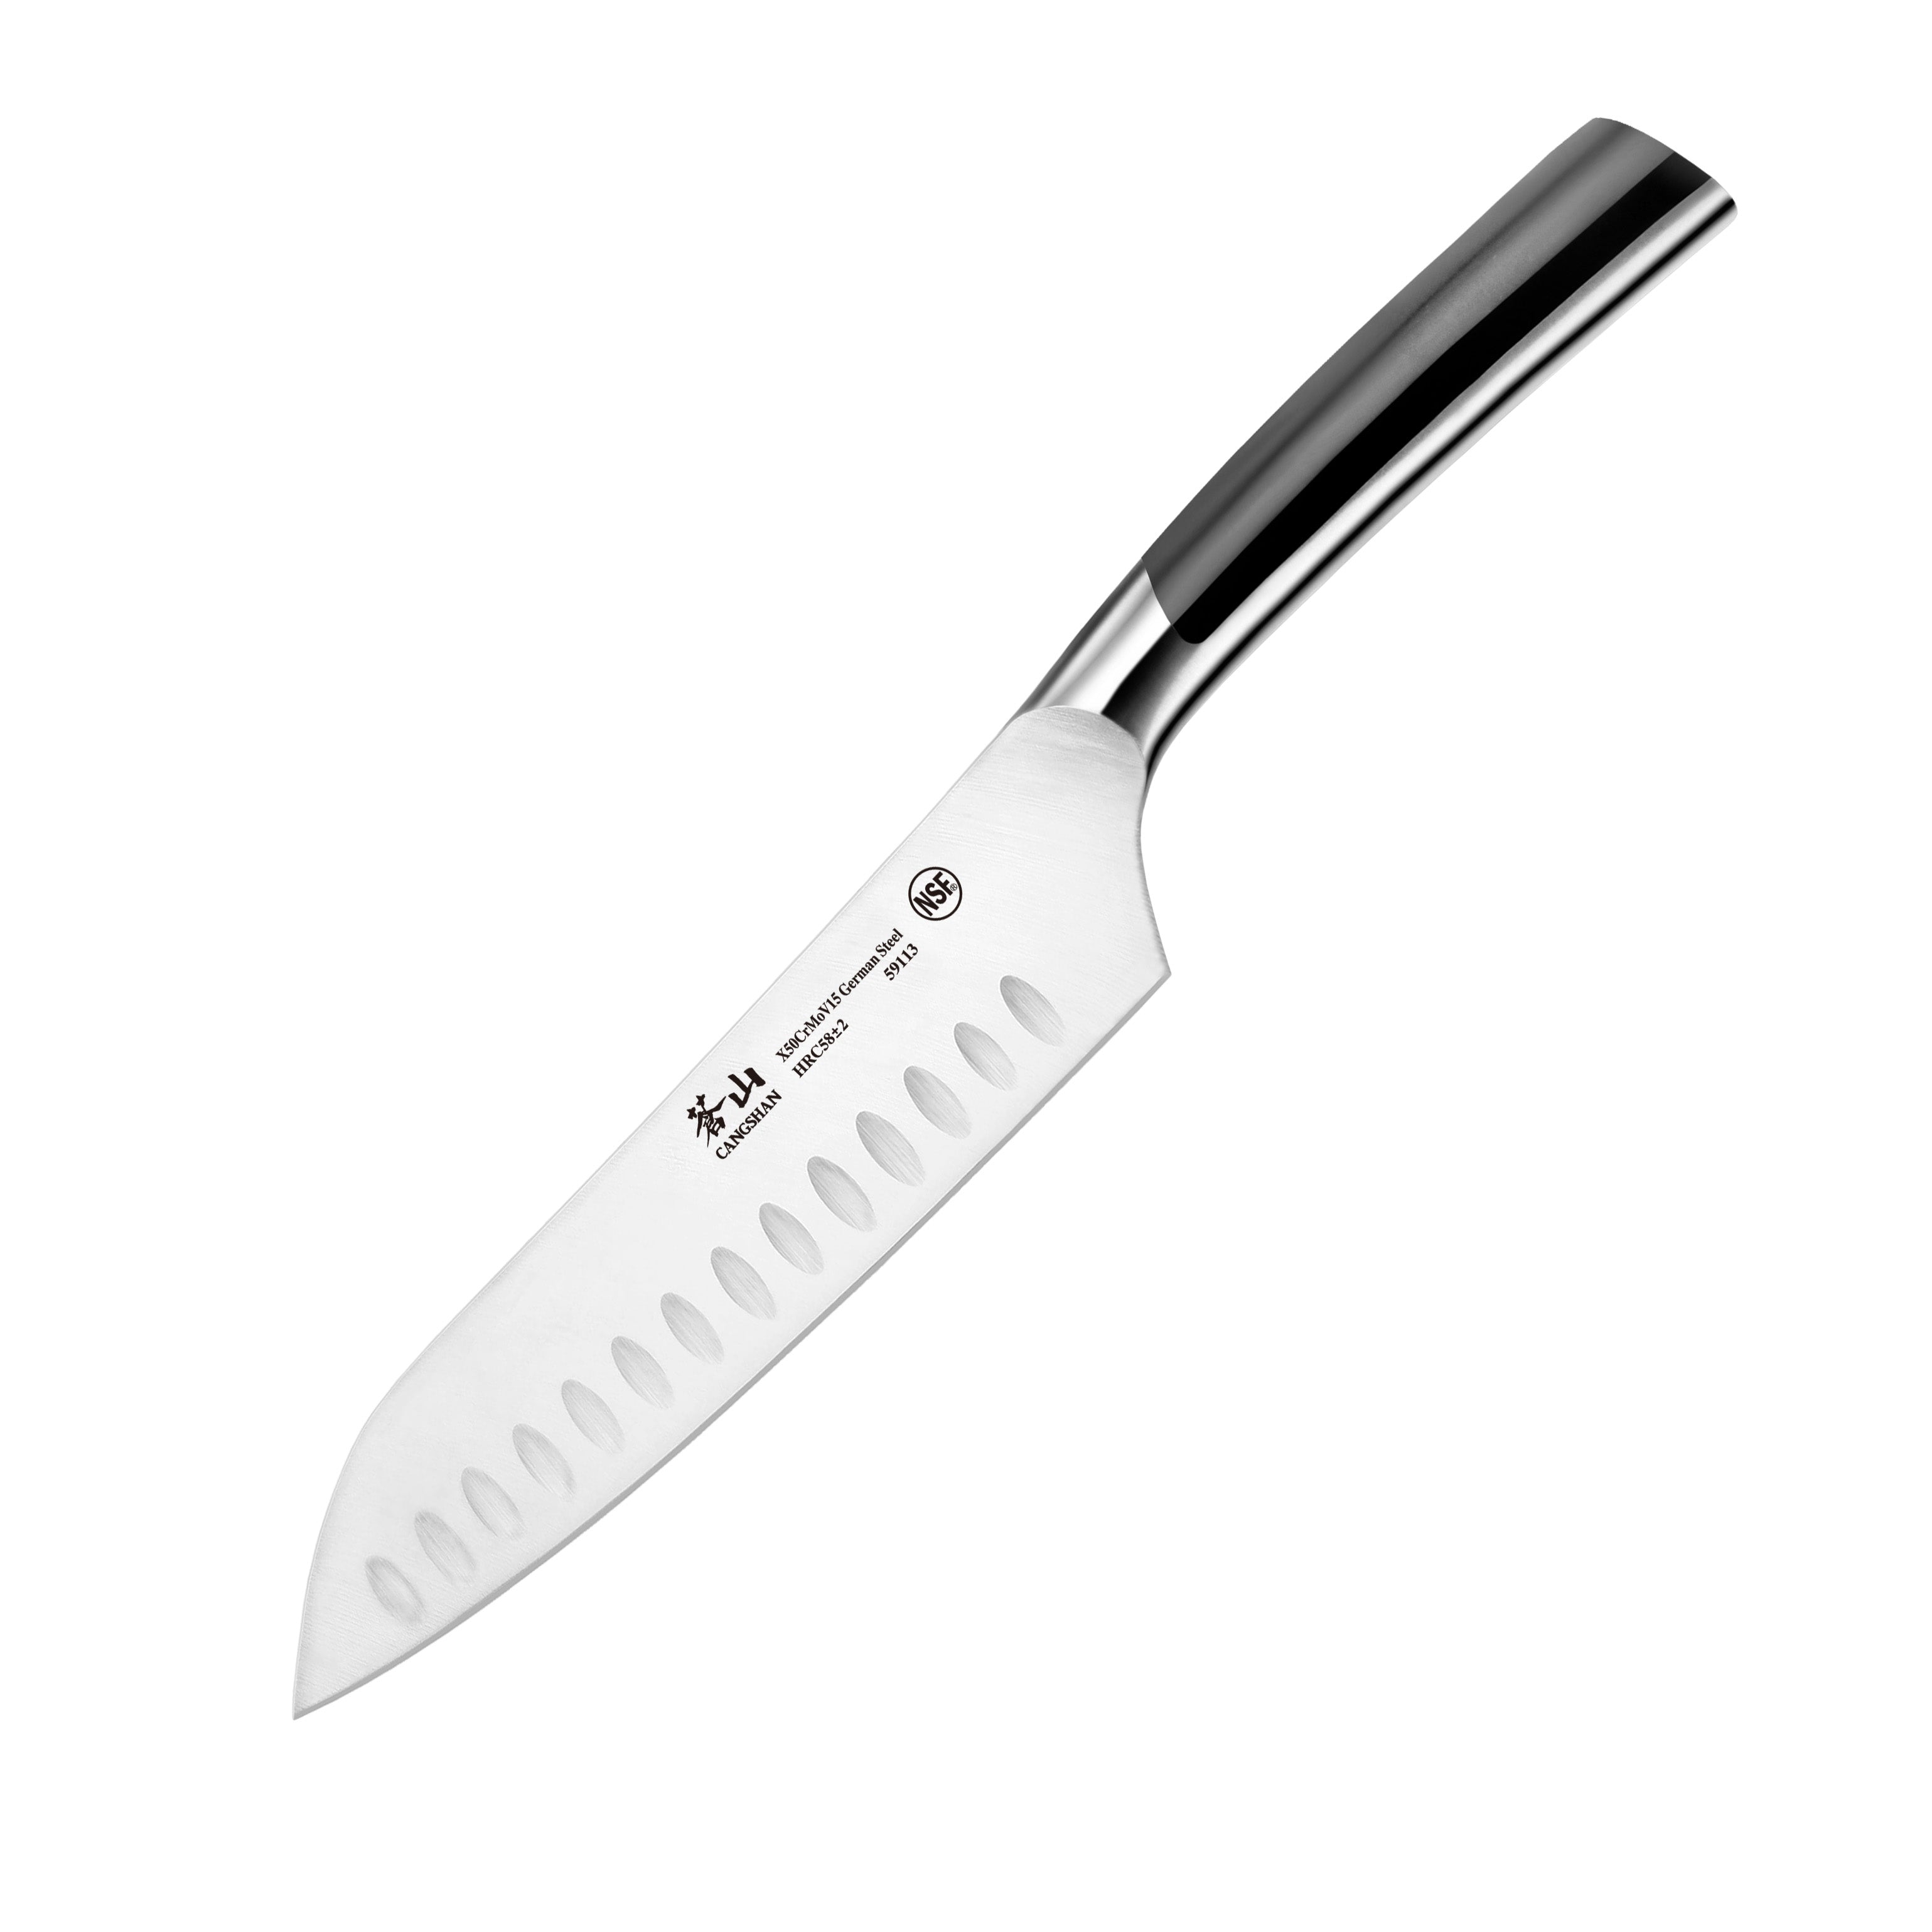 ENOKING Hand Forged Knife, 7 Inch Chef Knife, High Carbon Steel